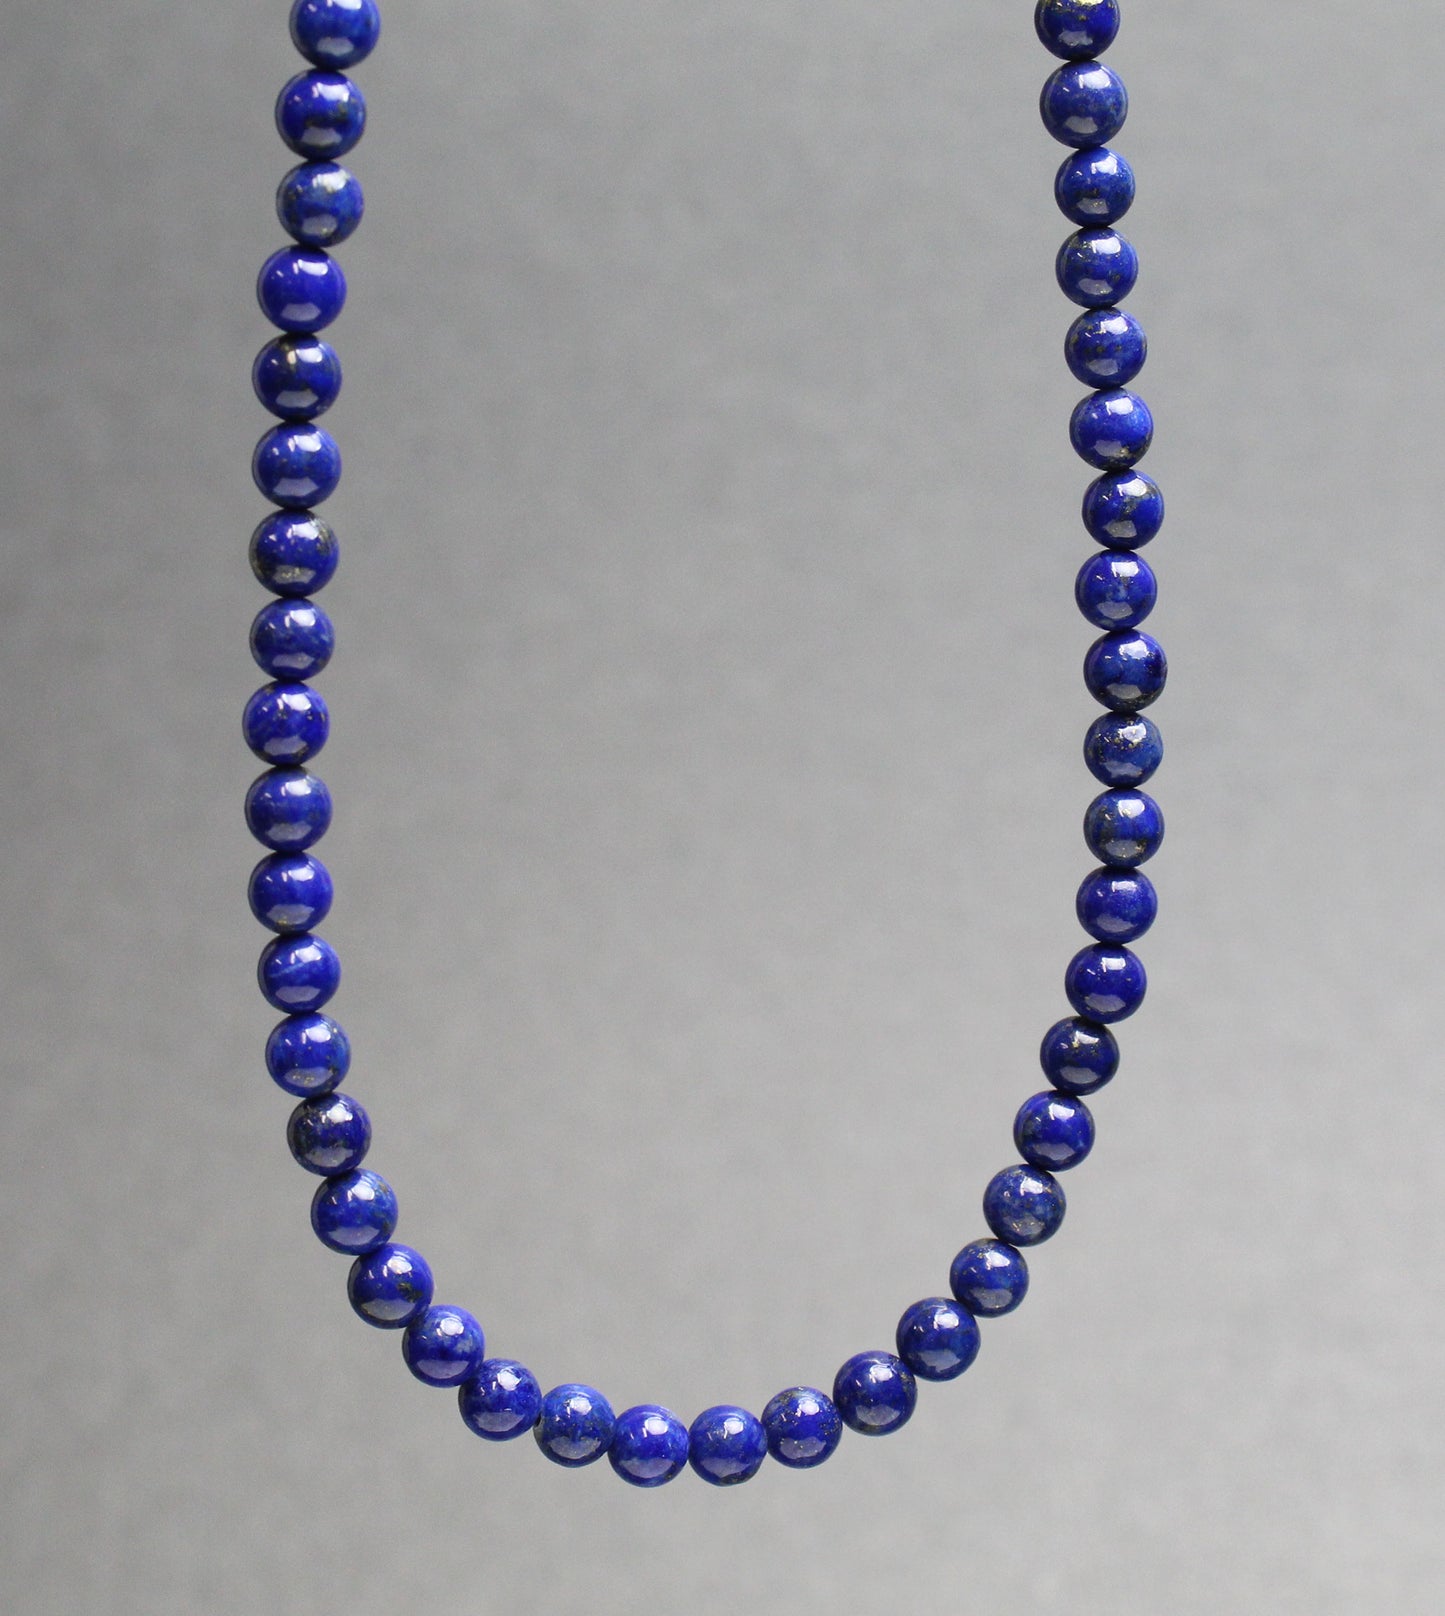 4mm Lapis Lazuli Bead Necklace Strand with Sterling Silver Clasp